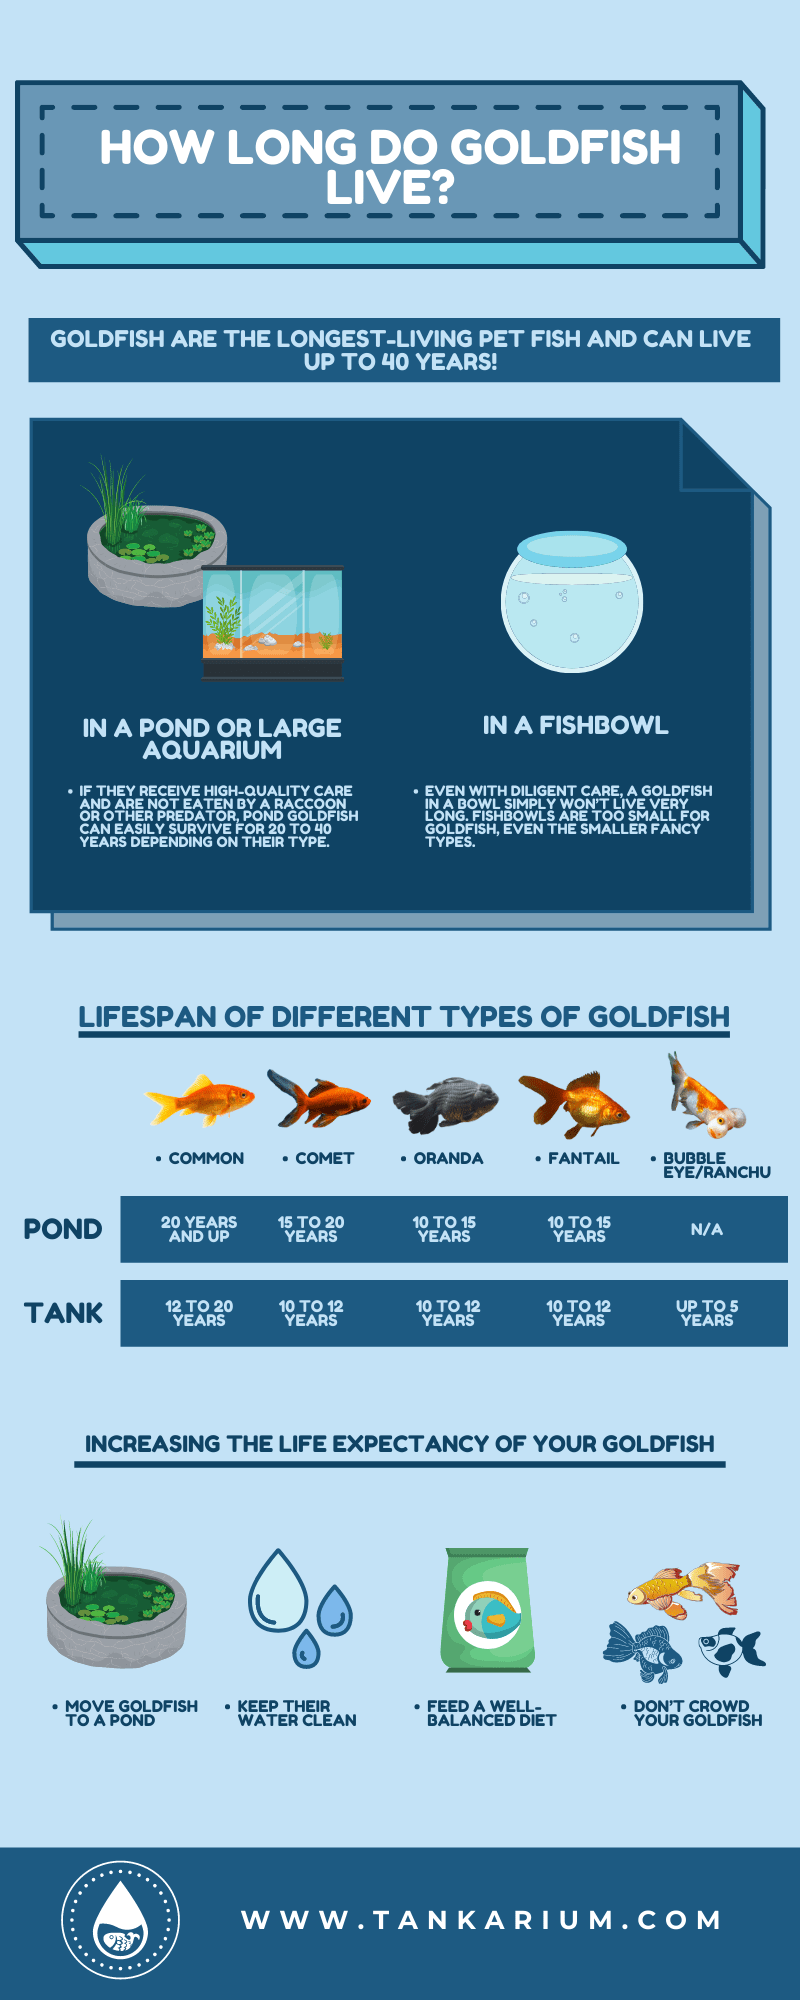 How Long do Goldfish Live? - Infographic